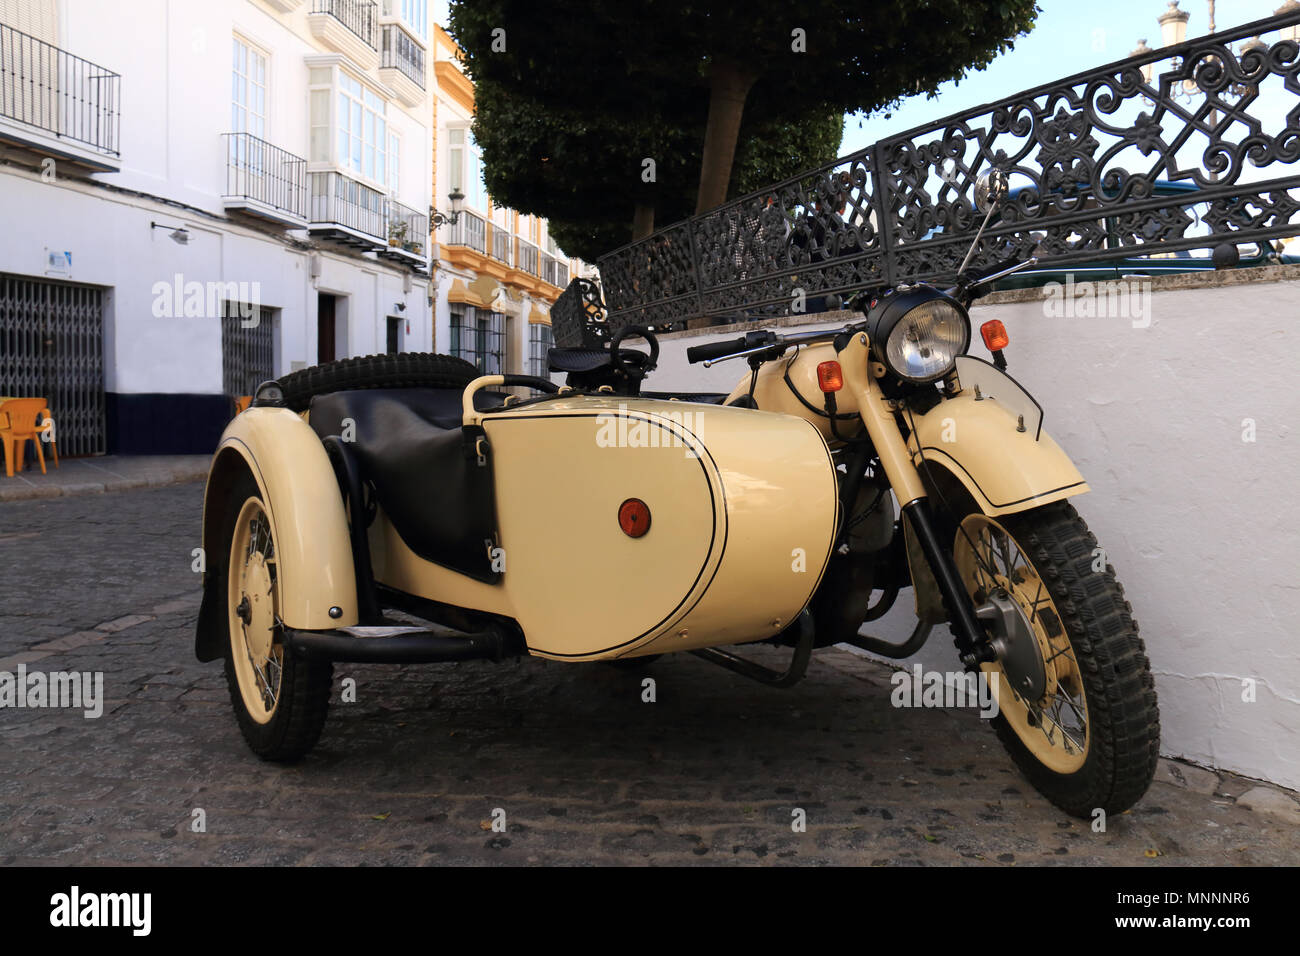 Old motorcycle with sidecar of the seventies Stock Photo